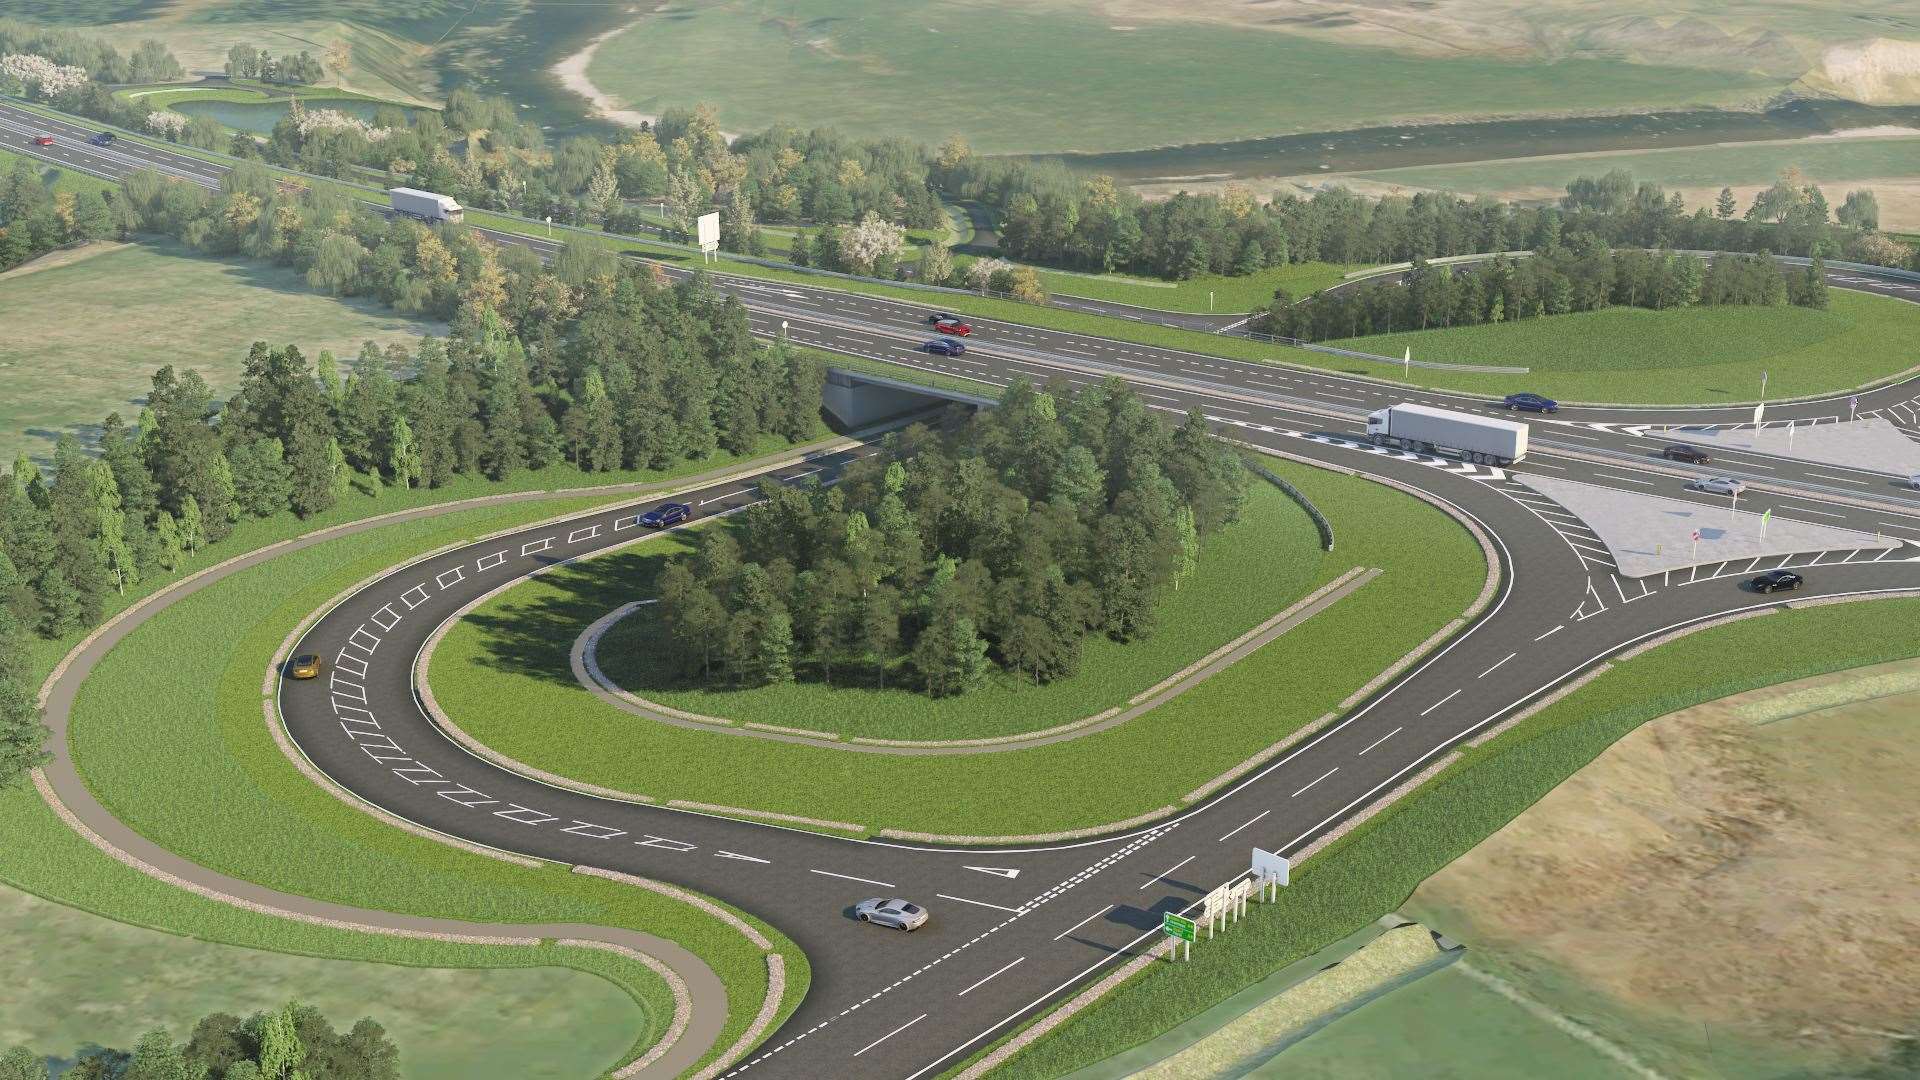 A visualisation of the new 'grade separated' Tomatin Junction which will be upgraded as part of the A9 Dualling Tomatin to Moy project.